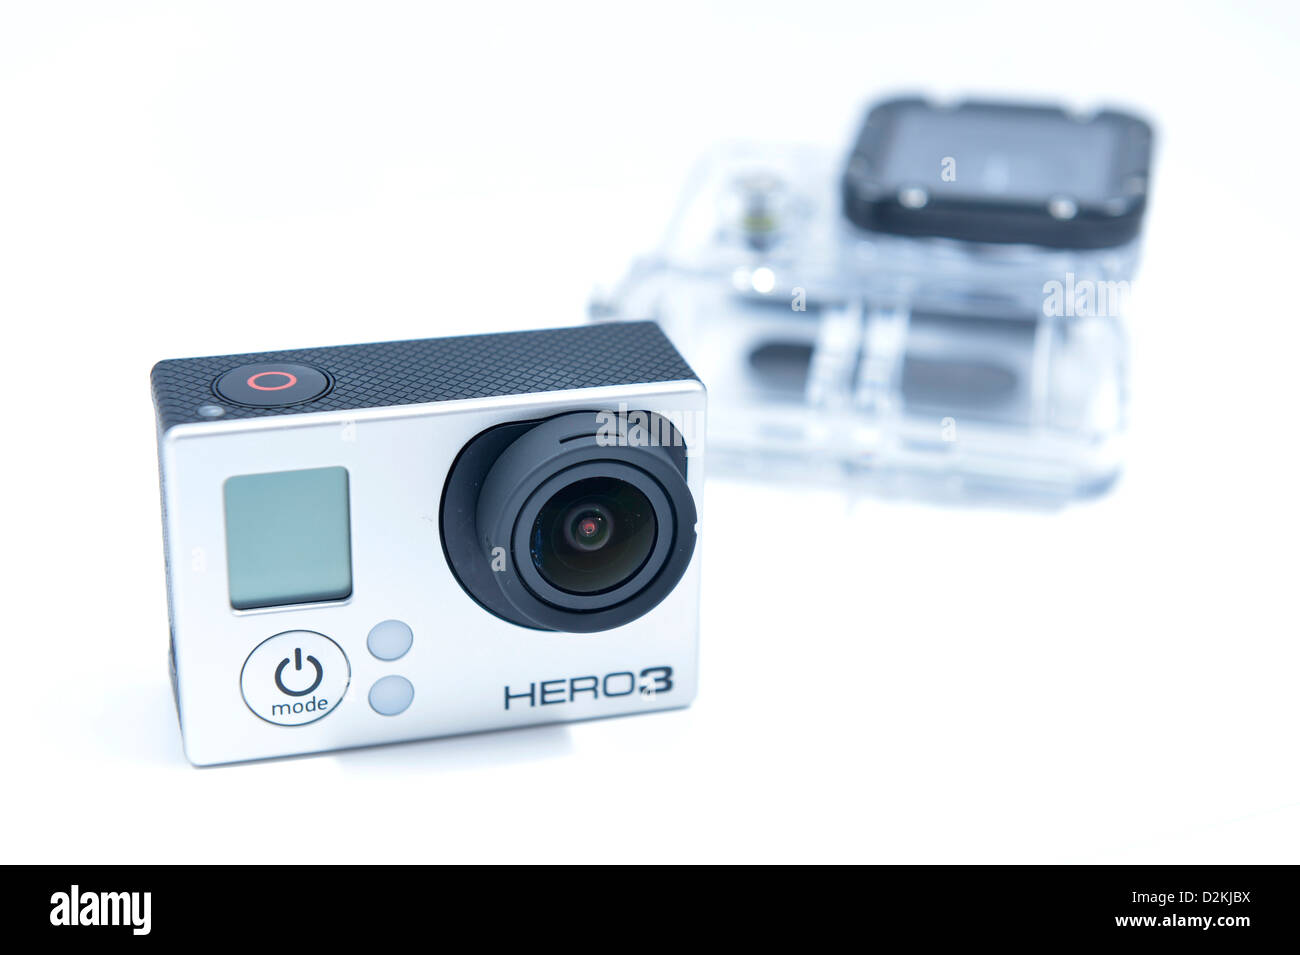 GoPro Hero 3 Black Edition camera with waterproof casing in the background Stock Photo